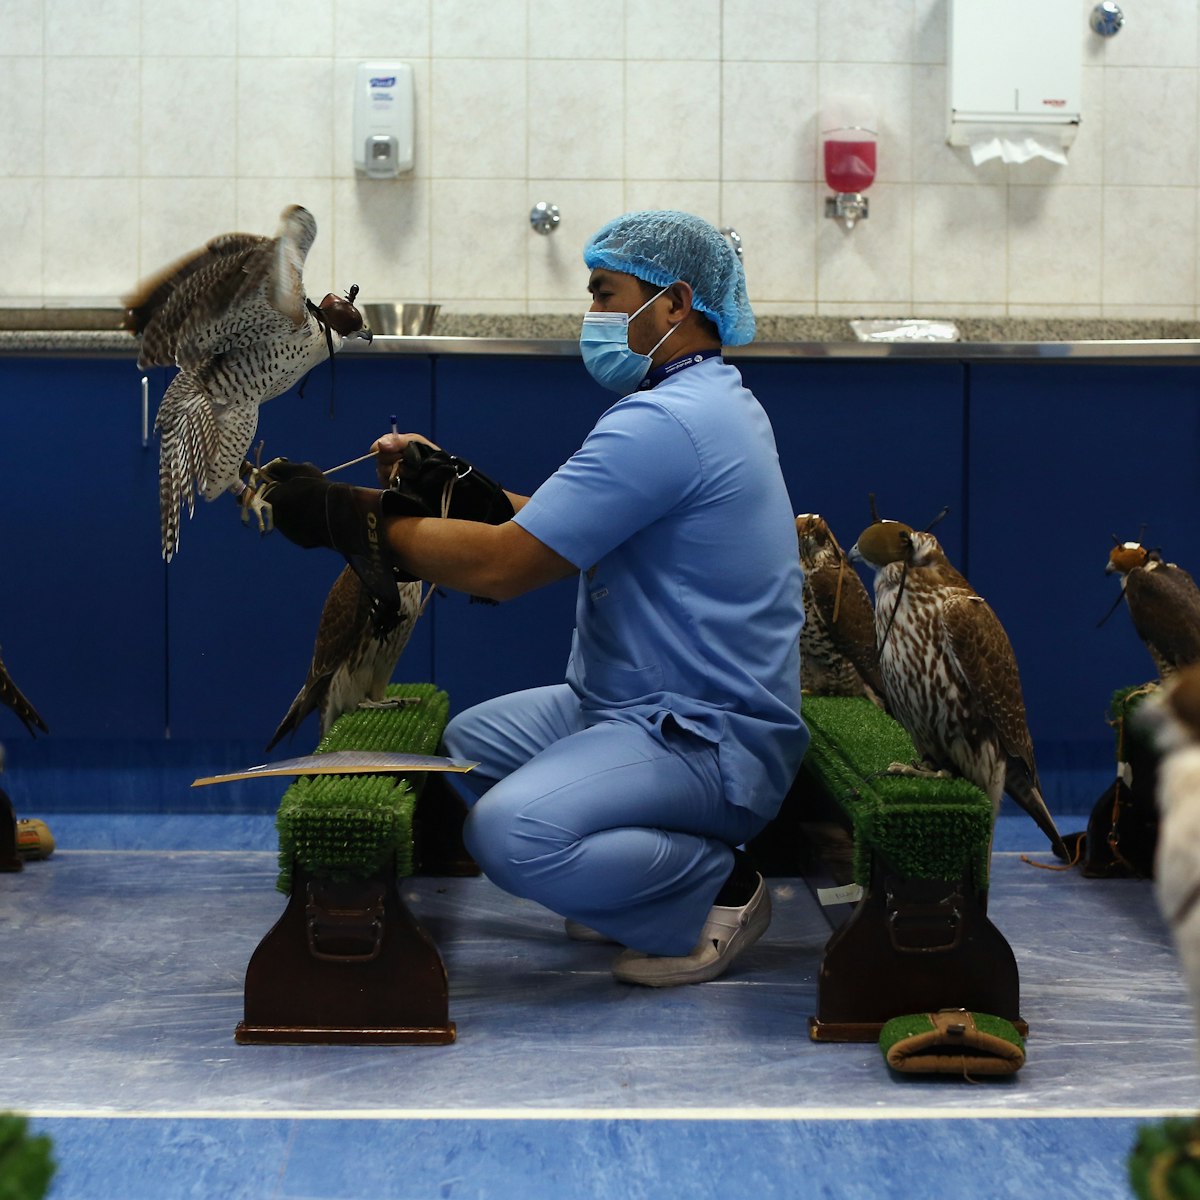 ABU DHABI, UNITED ARAB EMIRATES - FEBRUARY 03:  A falcon is placed on a bench at the Abu Dhabi Falcon Hospital, on February 3, 2015 in Abu Dhabi, United Arab Emirates. The Abu Dhabi Falcon Hospital (ADFH) is located just outside Abu Dhabi. It is the largest of its kind in the world attracting customers from all over the UAE and the wider Gulf region including Saudi Arabia, Qatar, Kuwait and Bahrain. Around 9,000 birds are treated each year for a wide range of ailments. The centre which has a an ophthalmology department, and intensive care unit is equipped to deal with everything from X-Rays, cases of Avian Flu, Falcon Pox, repairing of feathers, and general health checks and provides a 24 hour service. The centre also has two large air conditioned aviaries where falcons can rest while they are moulting, or changing their feathers. Traditionally a way of obtaining food, Falconry today has become more of a national sport and a rite of passage for many young Emirati men, who take their time to train their Falcons, developing a relationship and deep bond with the birds. Groups of friends regularly come together in the evenings to meet and train their birds where the practice becomes more about camaraderie and sharing knowledge than subsistence. The practice of Falconry was recognized by UNESCO in 2012 under the 'Intangible Cultural Heritage of Humanity' list.  (Photo by Dan Kitwood/Getty Images)